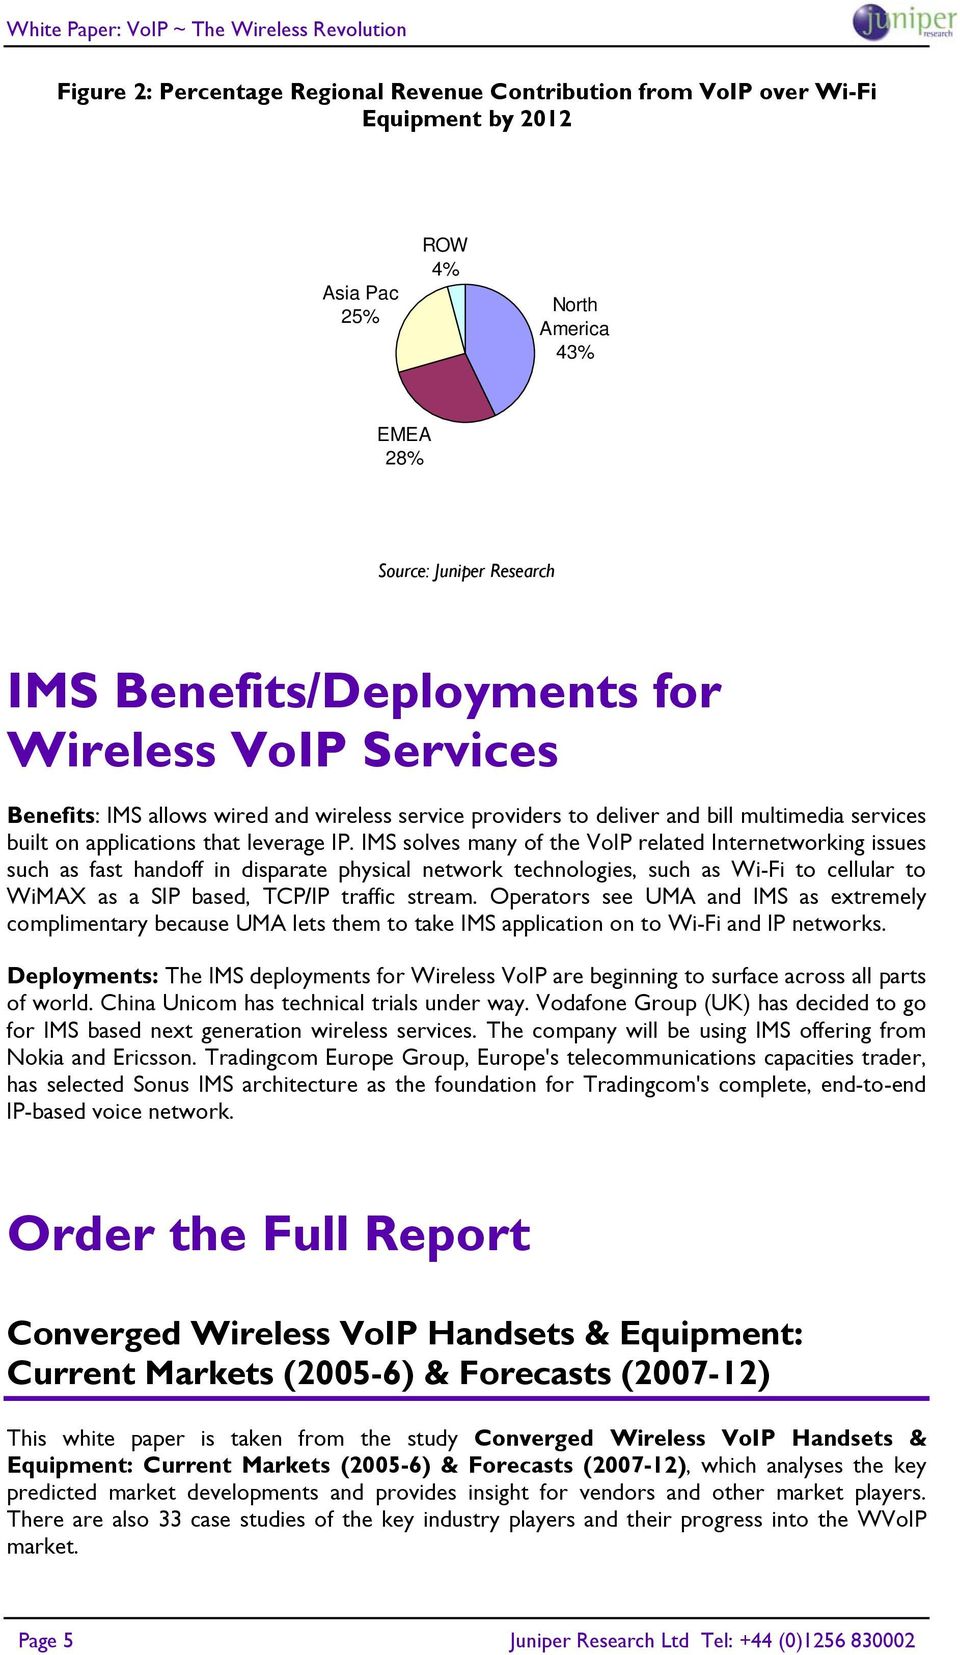 IMS solves many of the VoIP related Internetworking issues such as fast handoff in disparate physical network technologies, such as Wi-Fi to cellular to WiMAX as a SIP based, TCP/IP traffic stream.